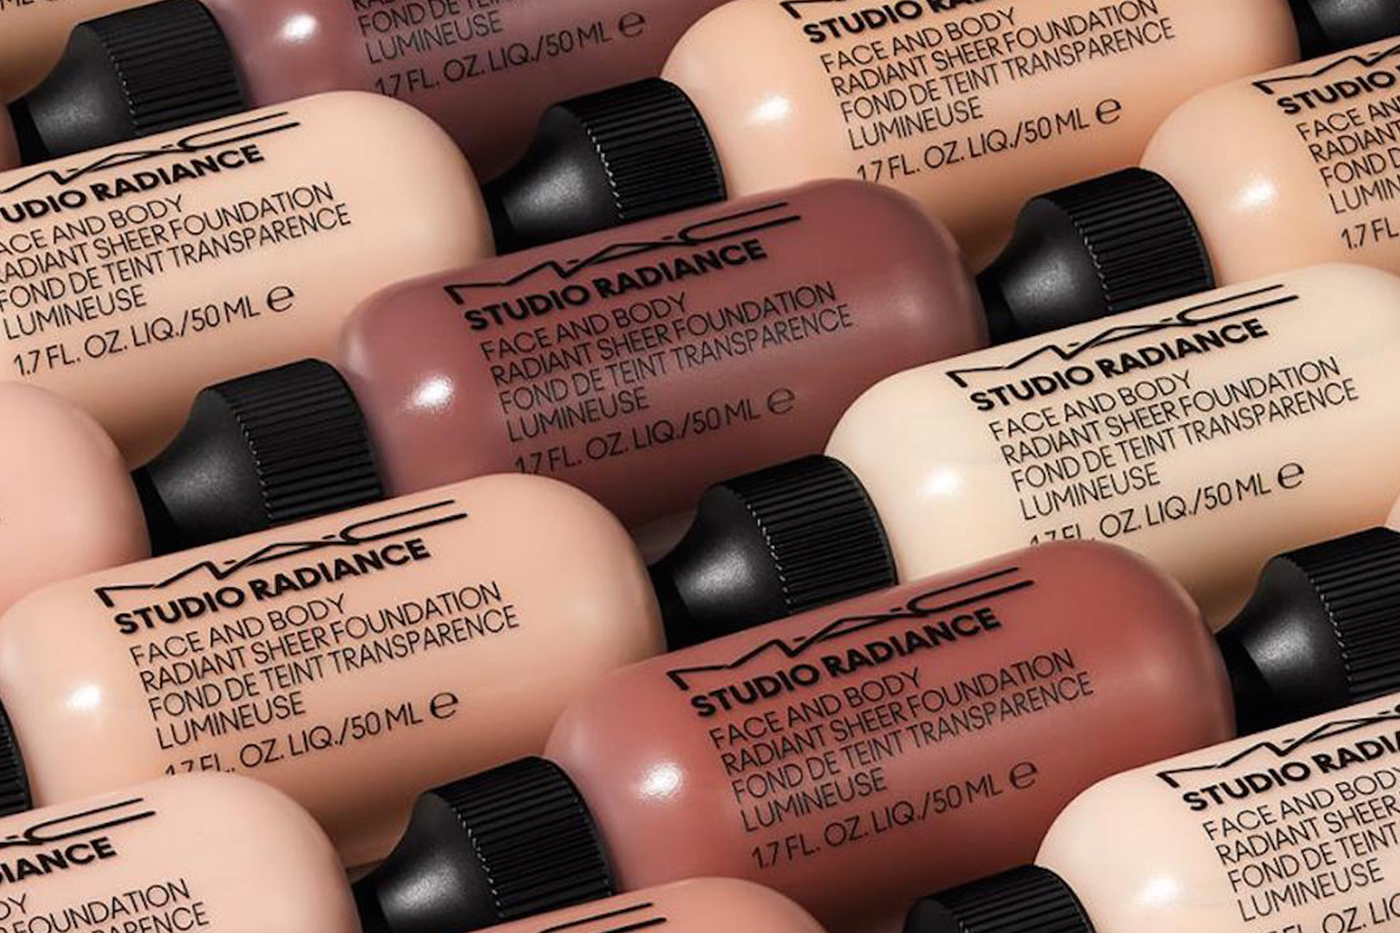 MAC relaunches Studio Face and Body Foundation as Studio Radiance